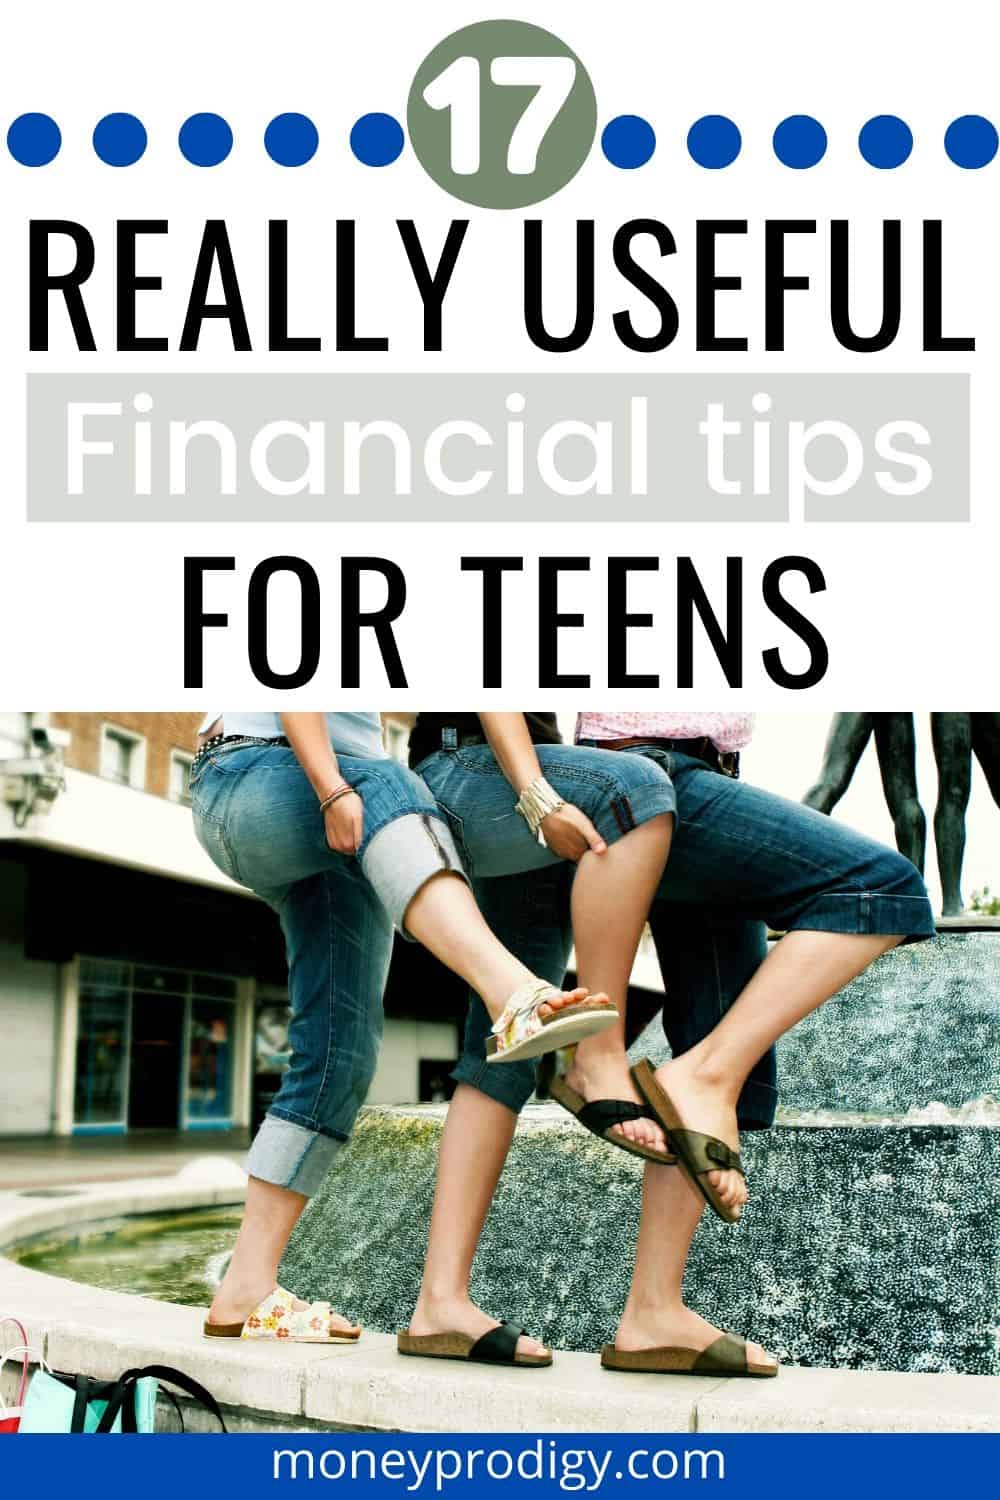 three teen girls playing on a fountain, text overlay "17 really useful financial tips for teens"